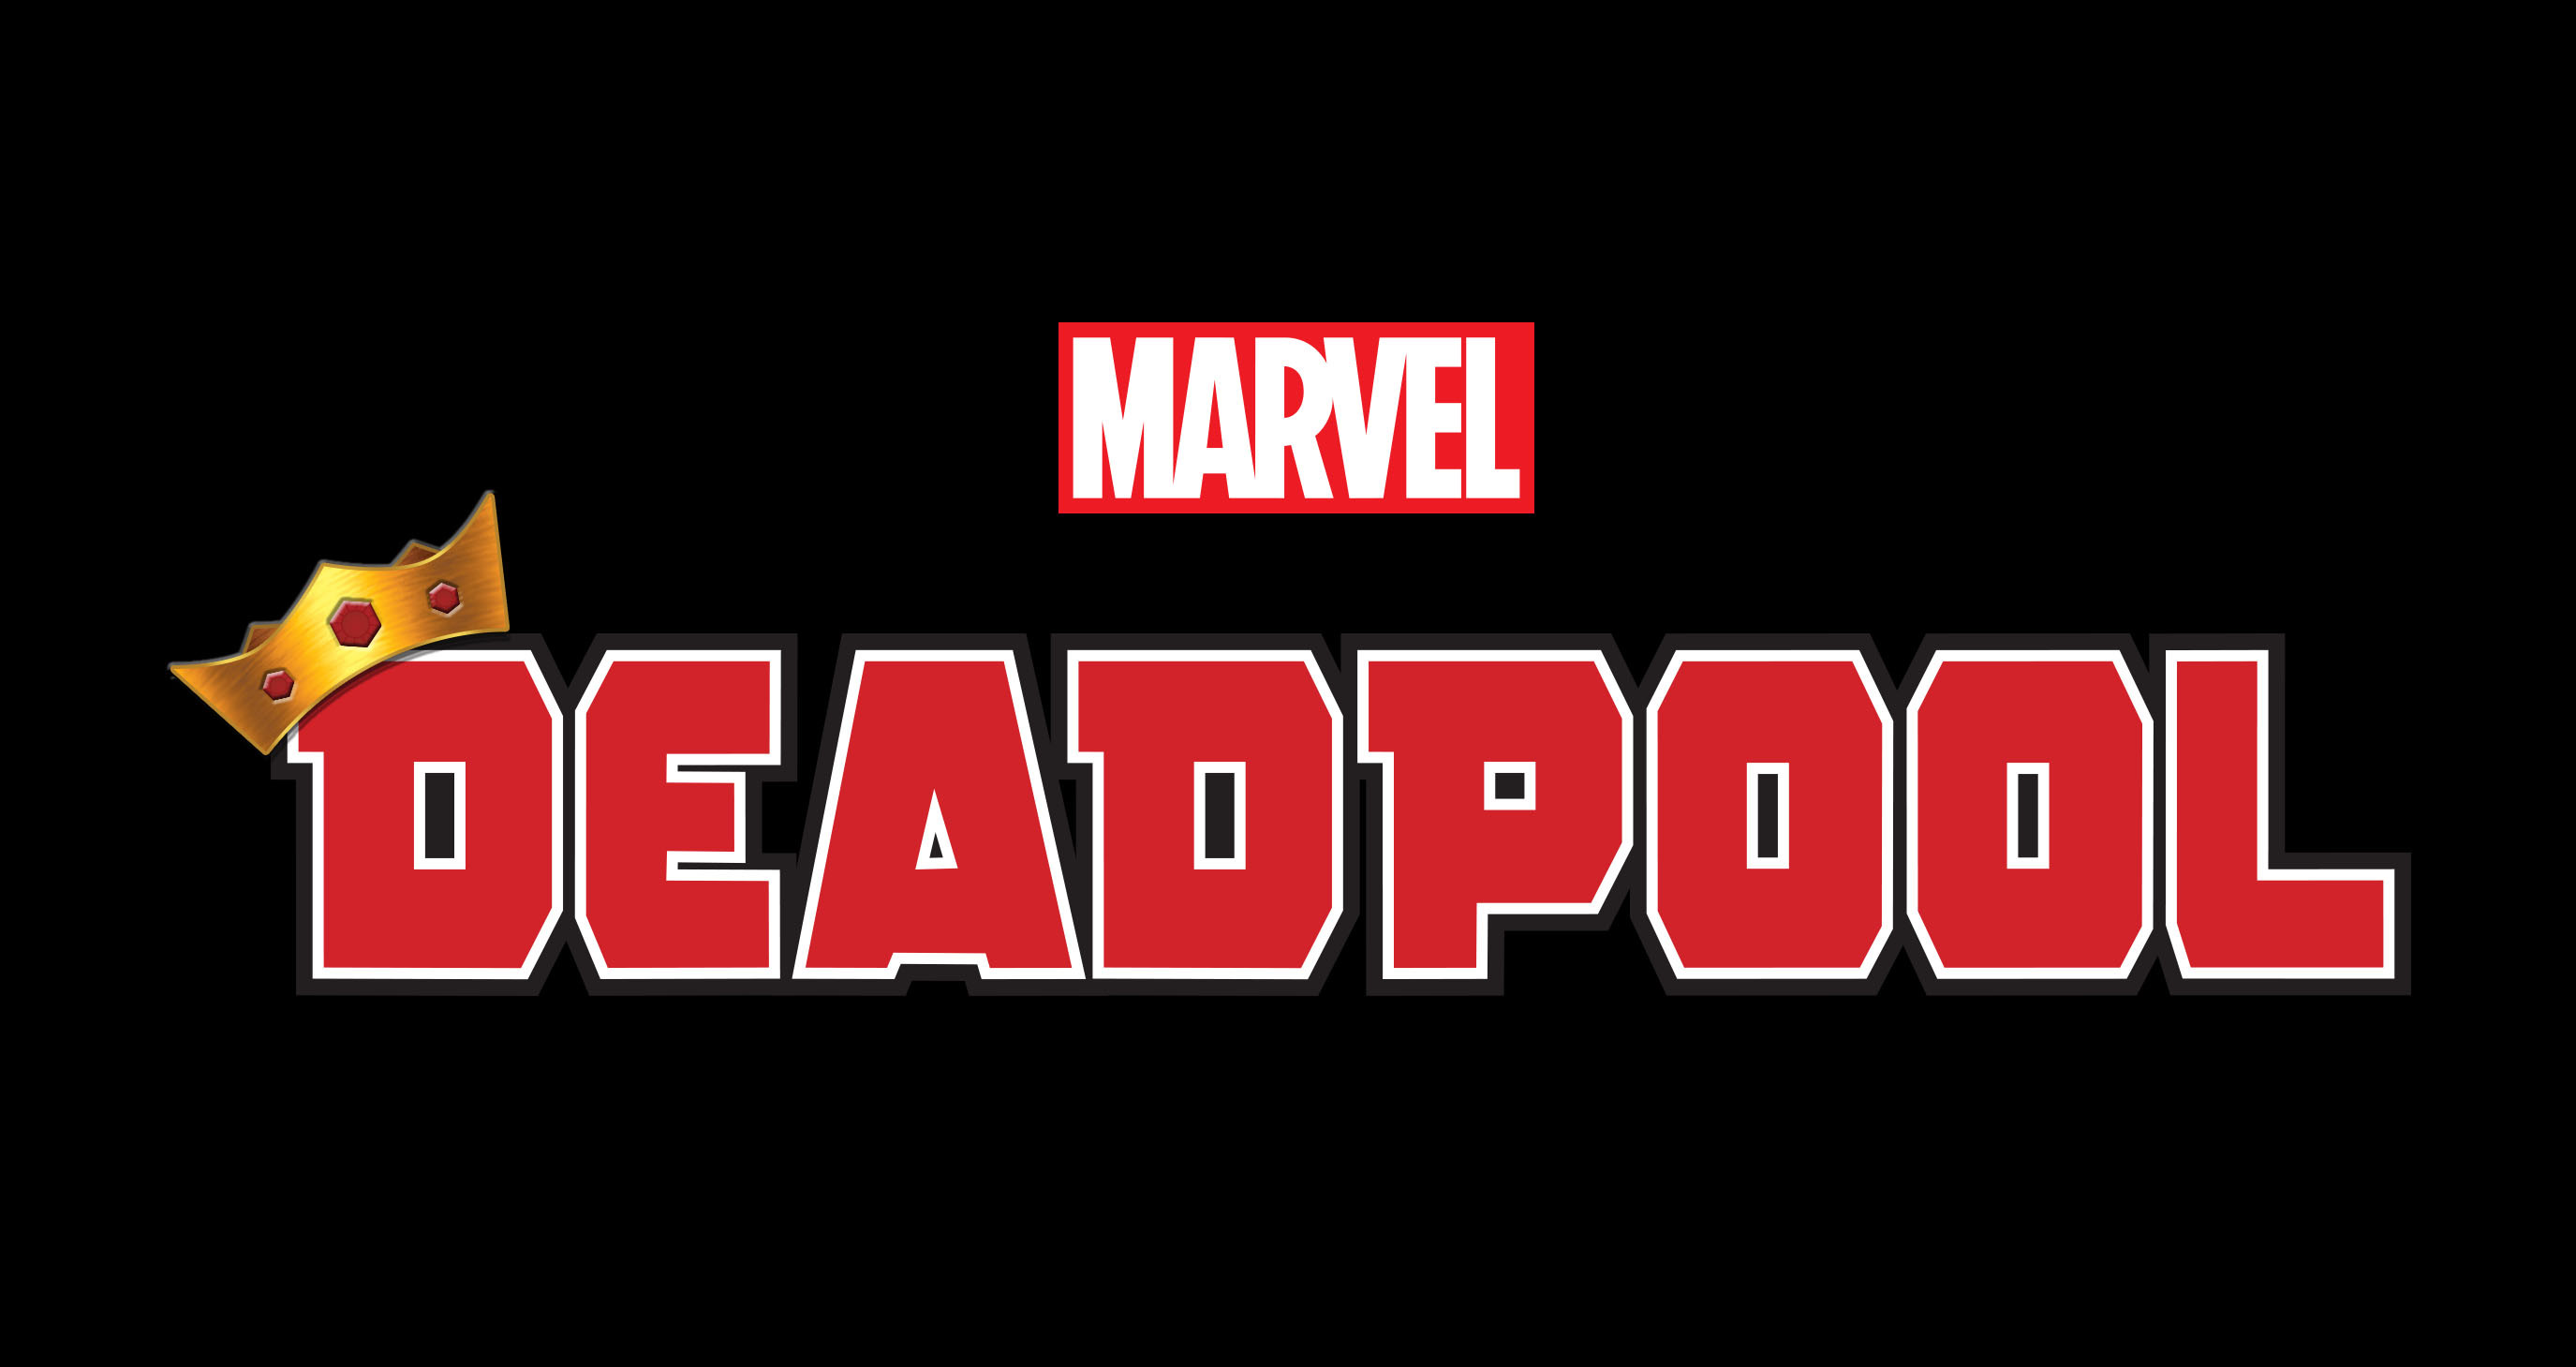 Marvel's King Deadpool Logo (Responsibility: The addition of the crown to the pre-existing Deadpool logo).  Published by Marvel Entertainment